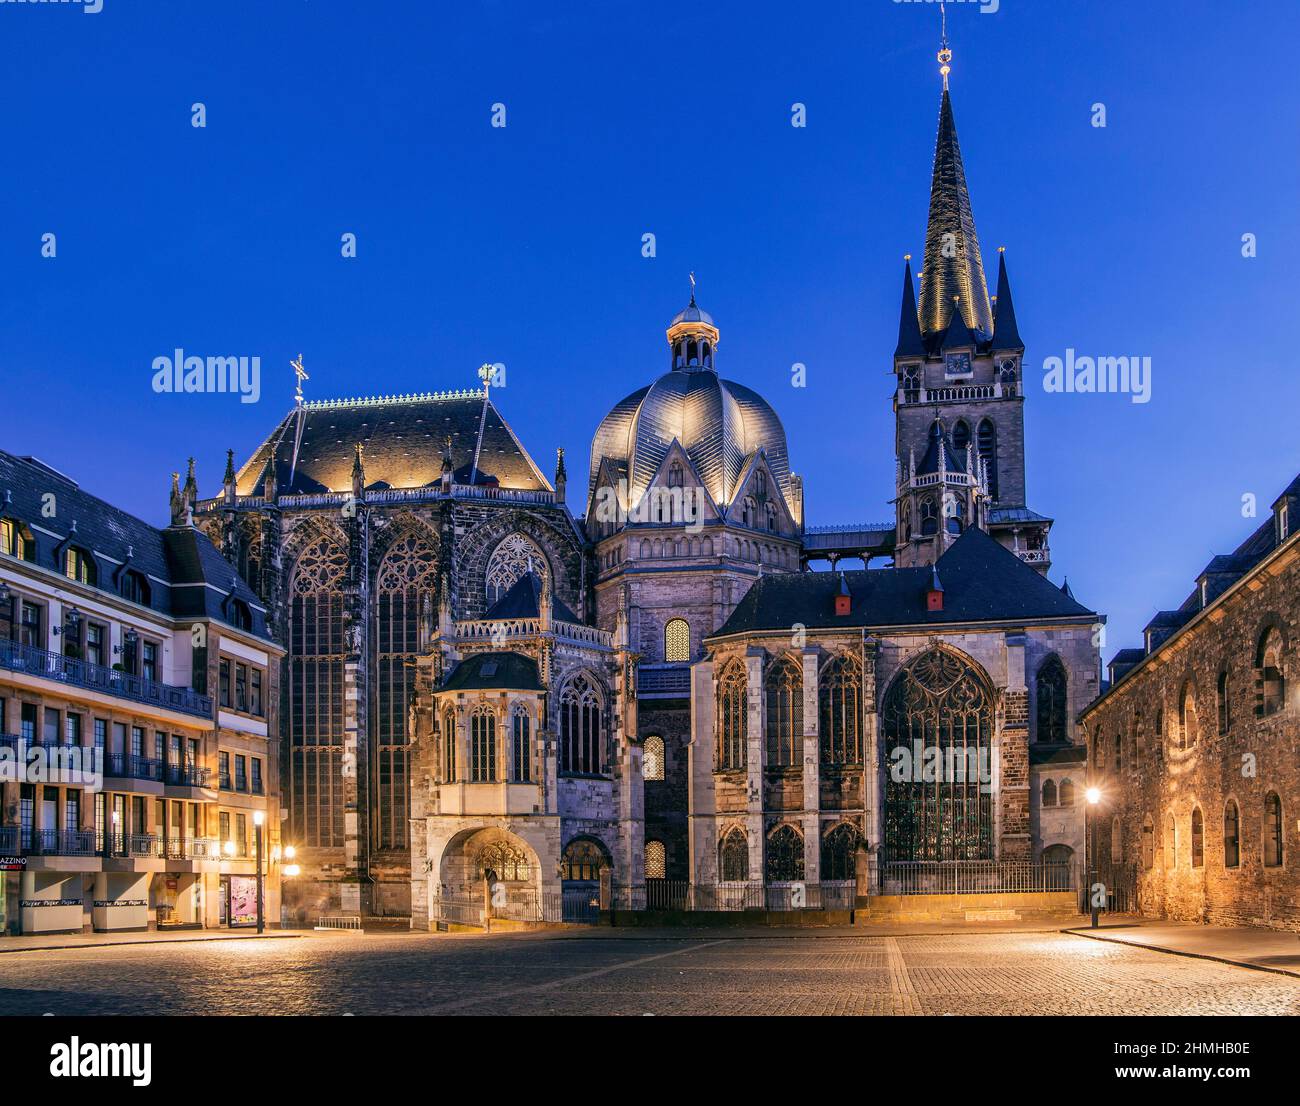 Katschhof with north view from the Kaiserdom at night, Aachen, North Rhine-Westphalia, Germany Stock Photo